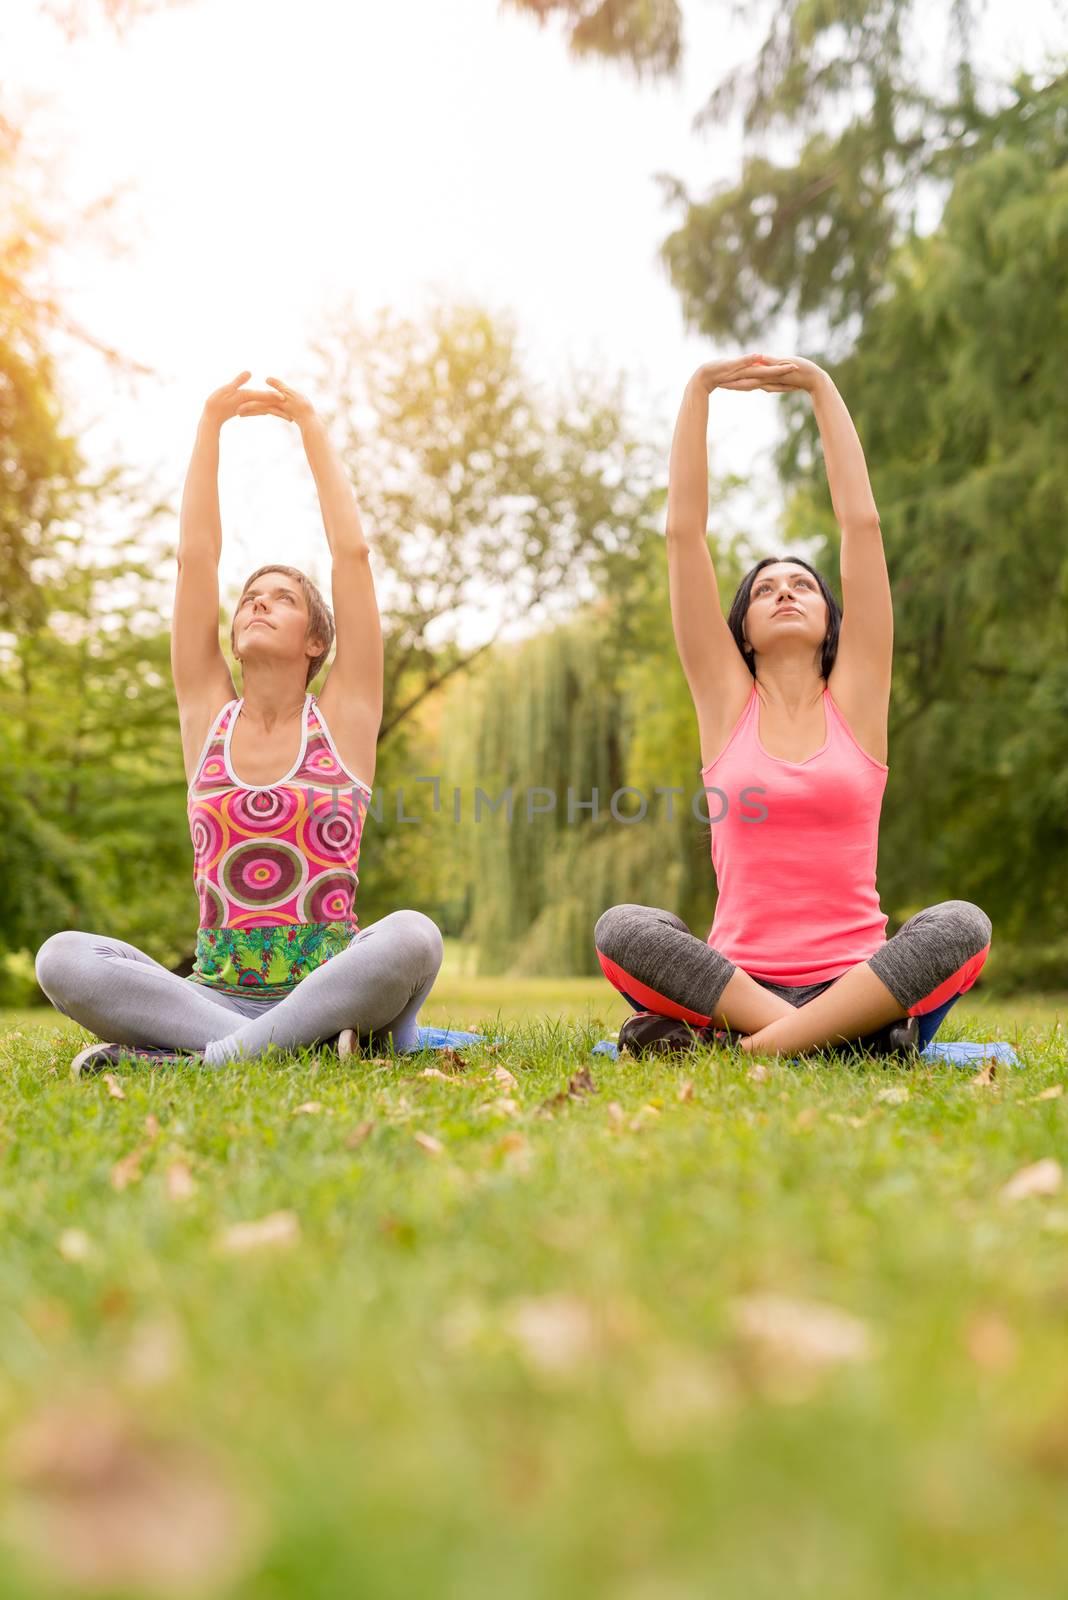 Two beautiful women doing stretching exercise in the park. 